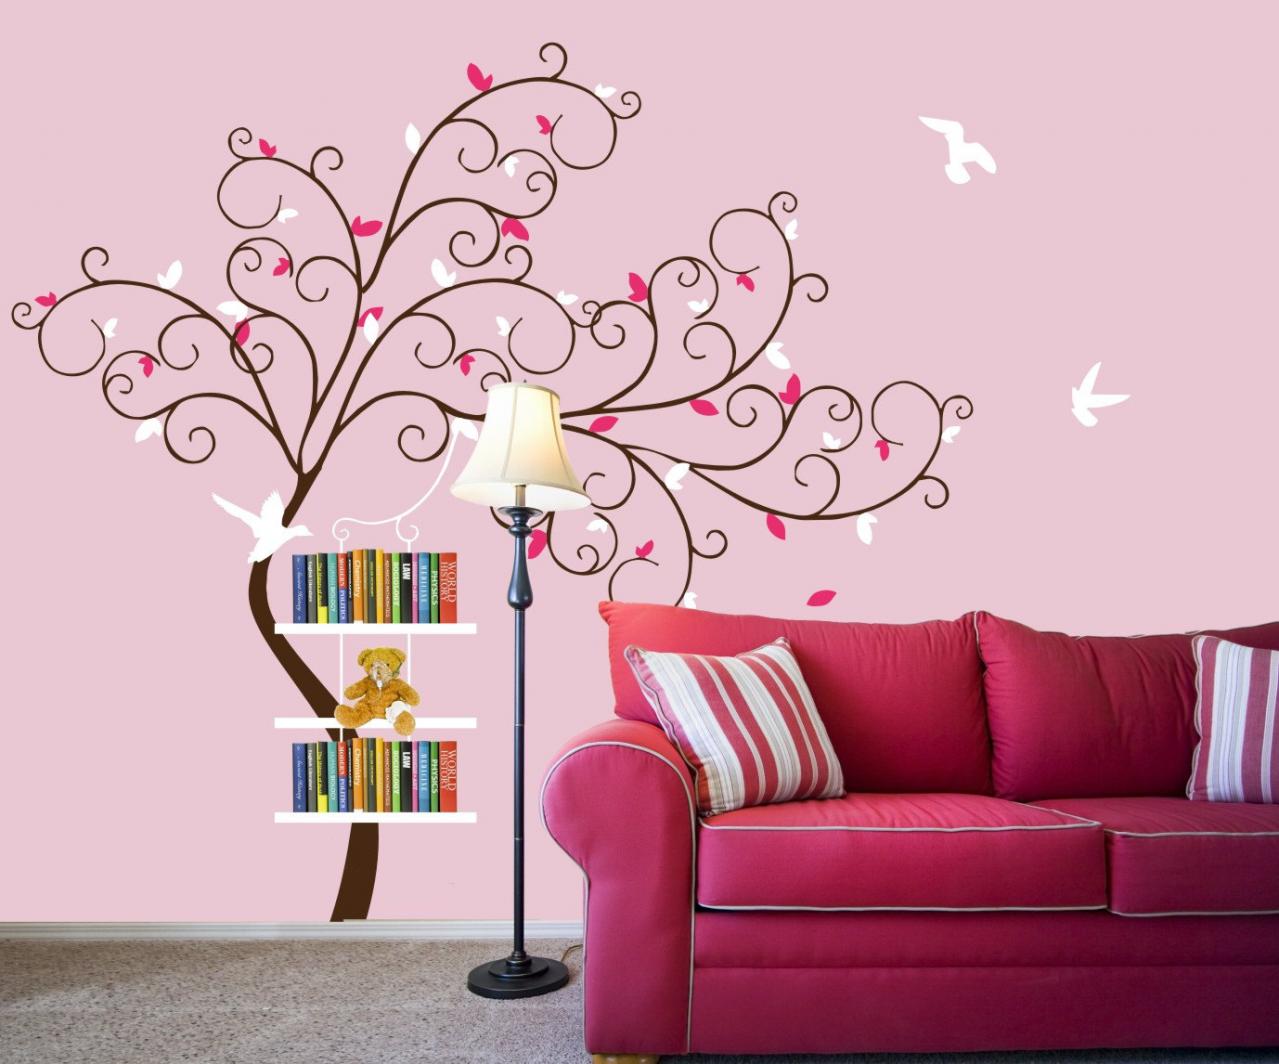 Vinyl Wall Decal Volume Shelf Shelving Tree Leaf With Flying Birds Bird Home House Art Wall Decals Wall Sticker Stickers Baby Room Kid R516